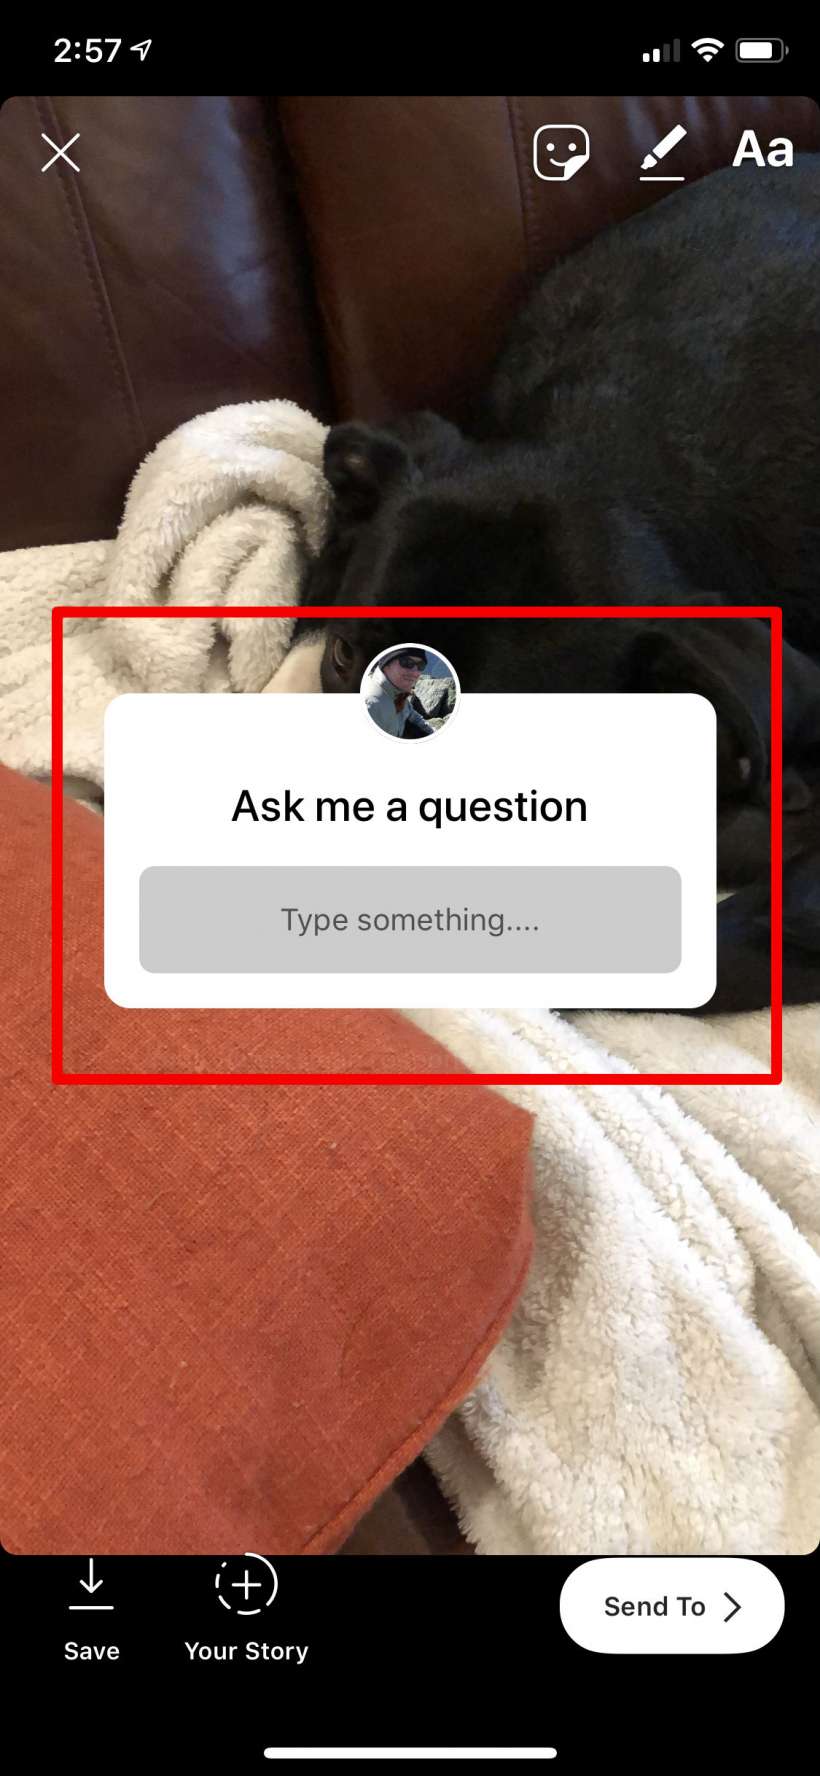 How to use question stickers in Instagram on iPhone and iPad.